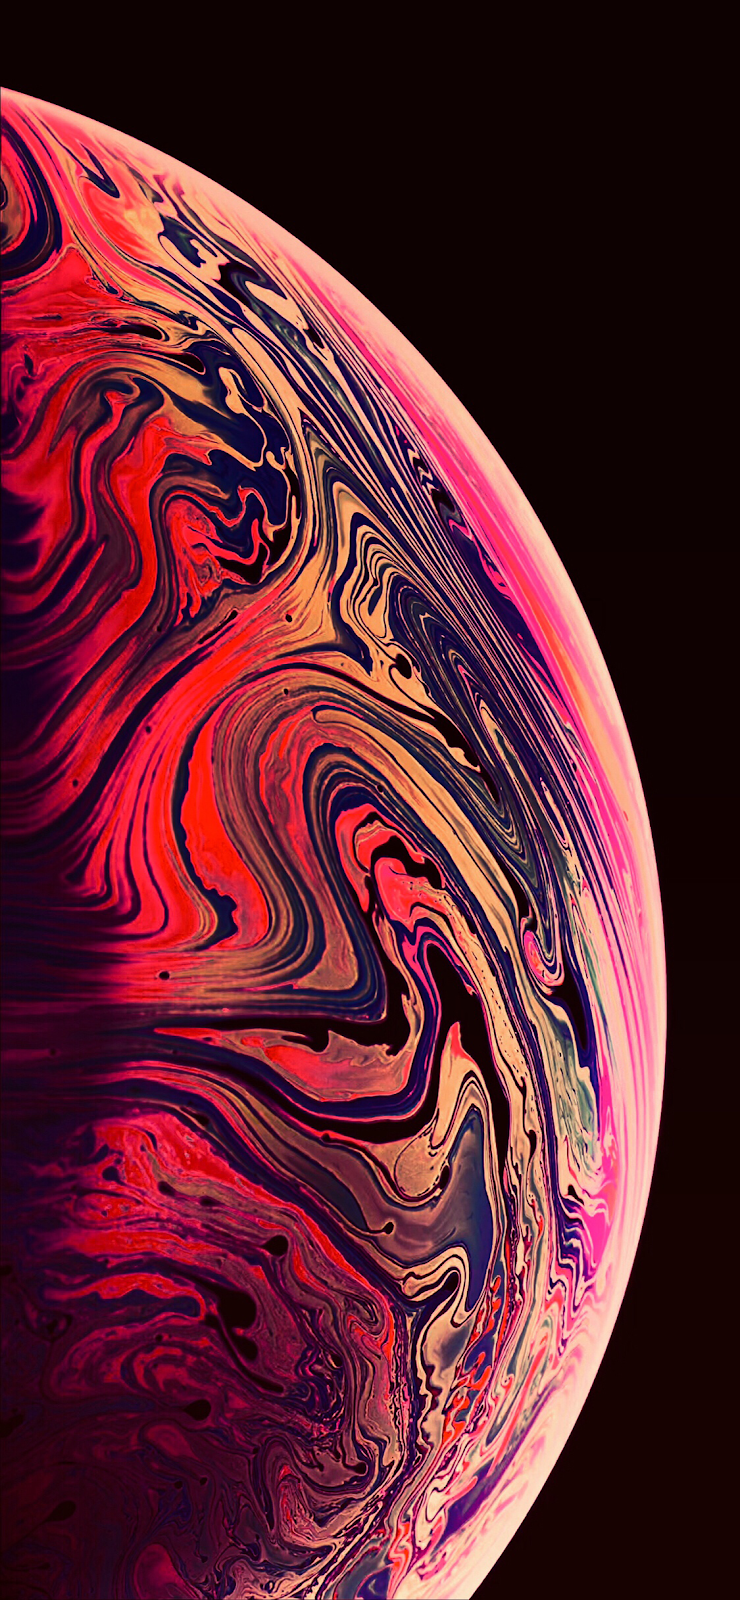 iPhone XS MAX Gradient Modd Wallpapers by AR72014 (2 variants)